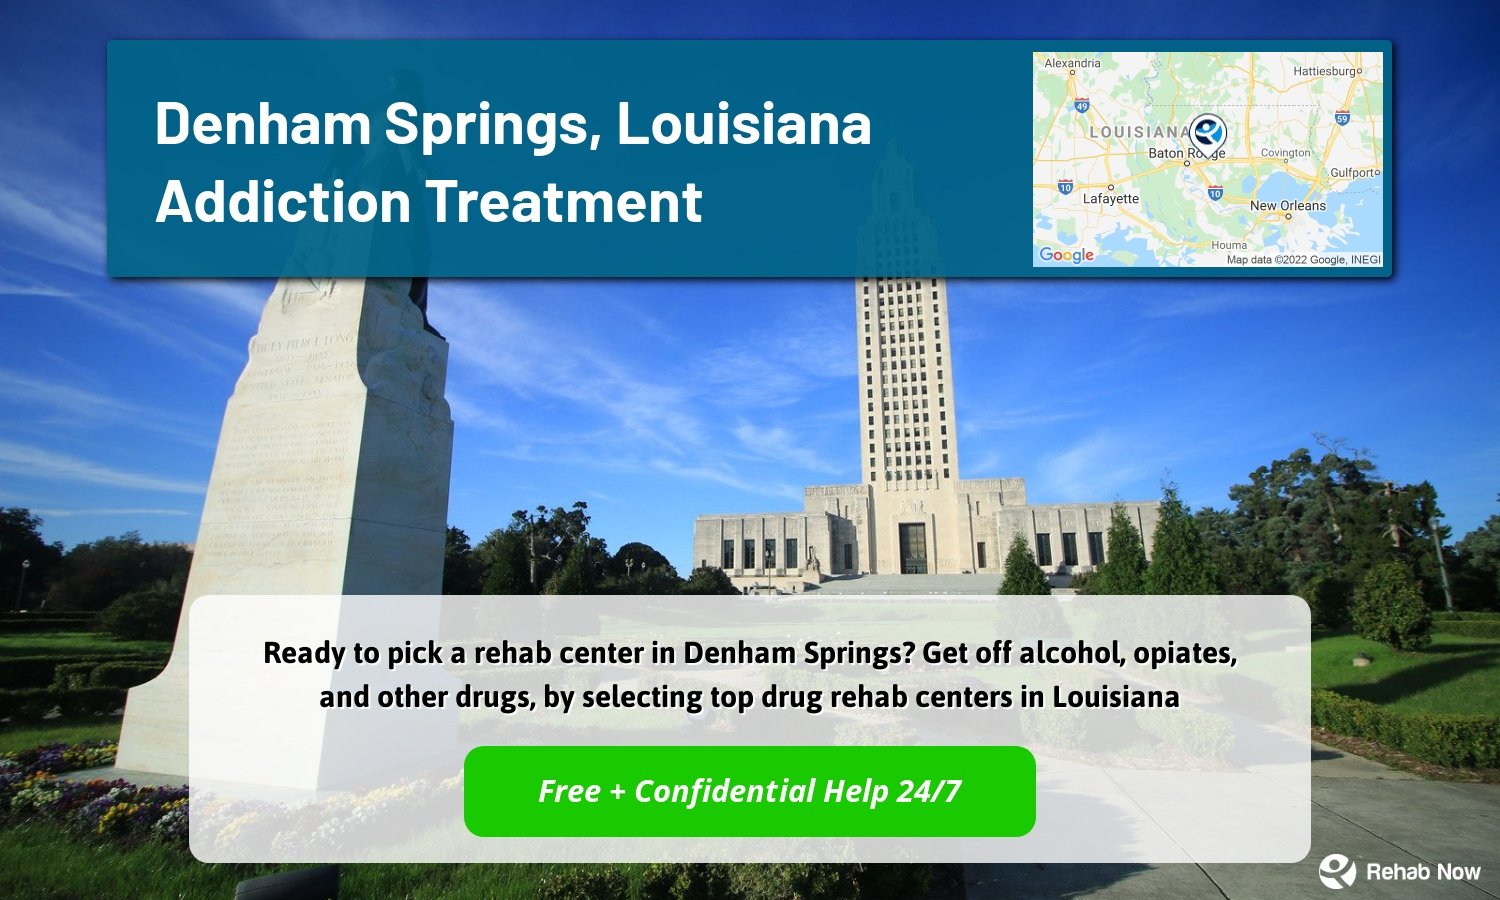 Ready to pick a rehab center in Denham Springs? Get off alcohol, opiates, and other drugs, by selecting top drug rehab centers in Louisiana